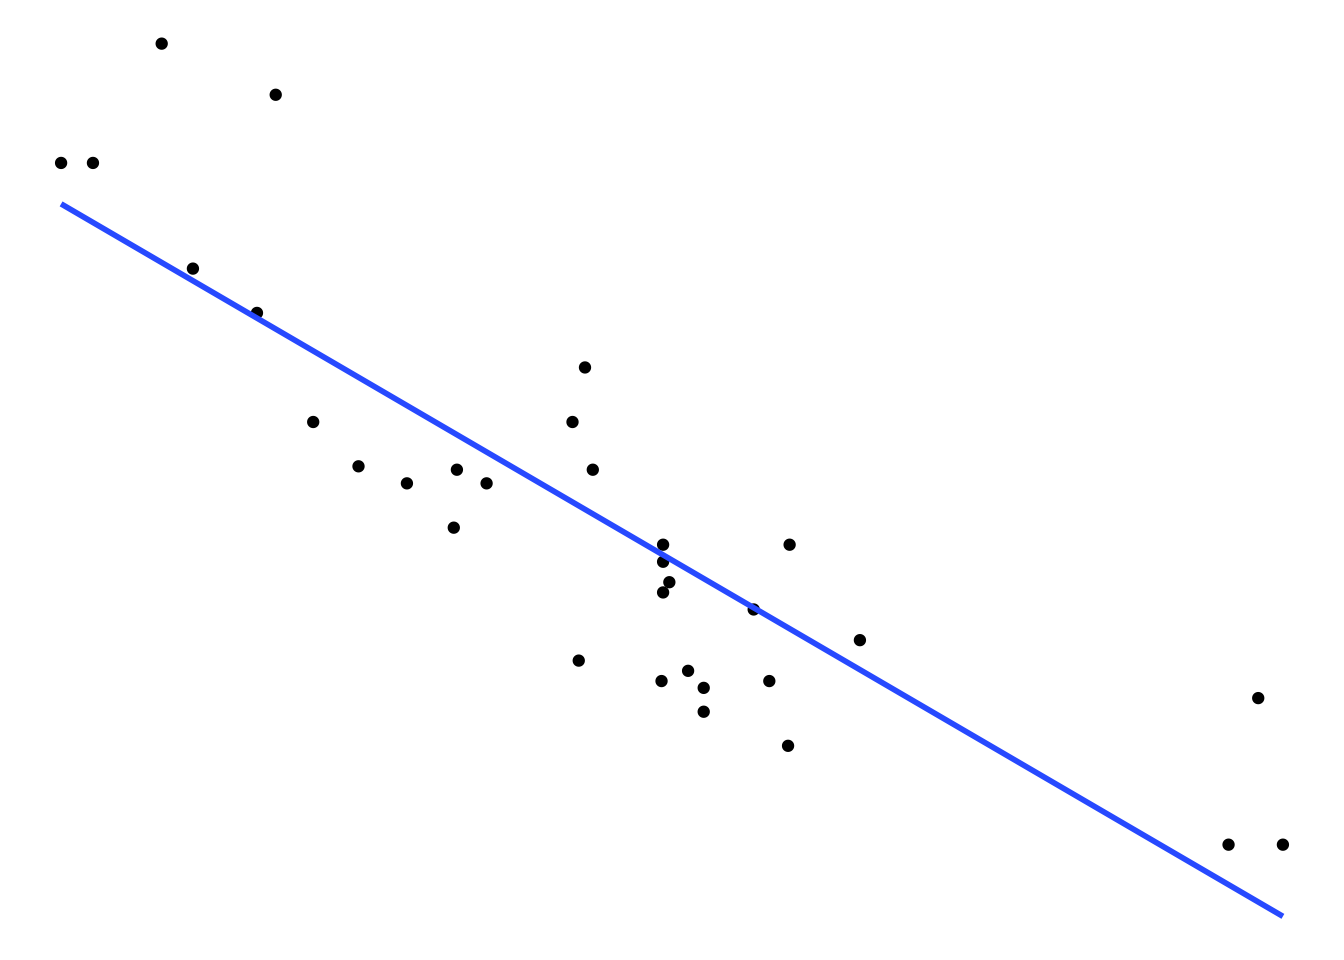 Figure: Scatterplot with Void Theme